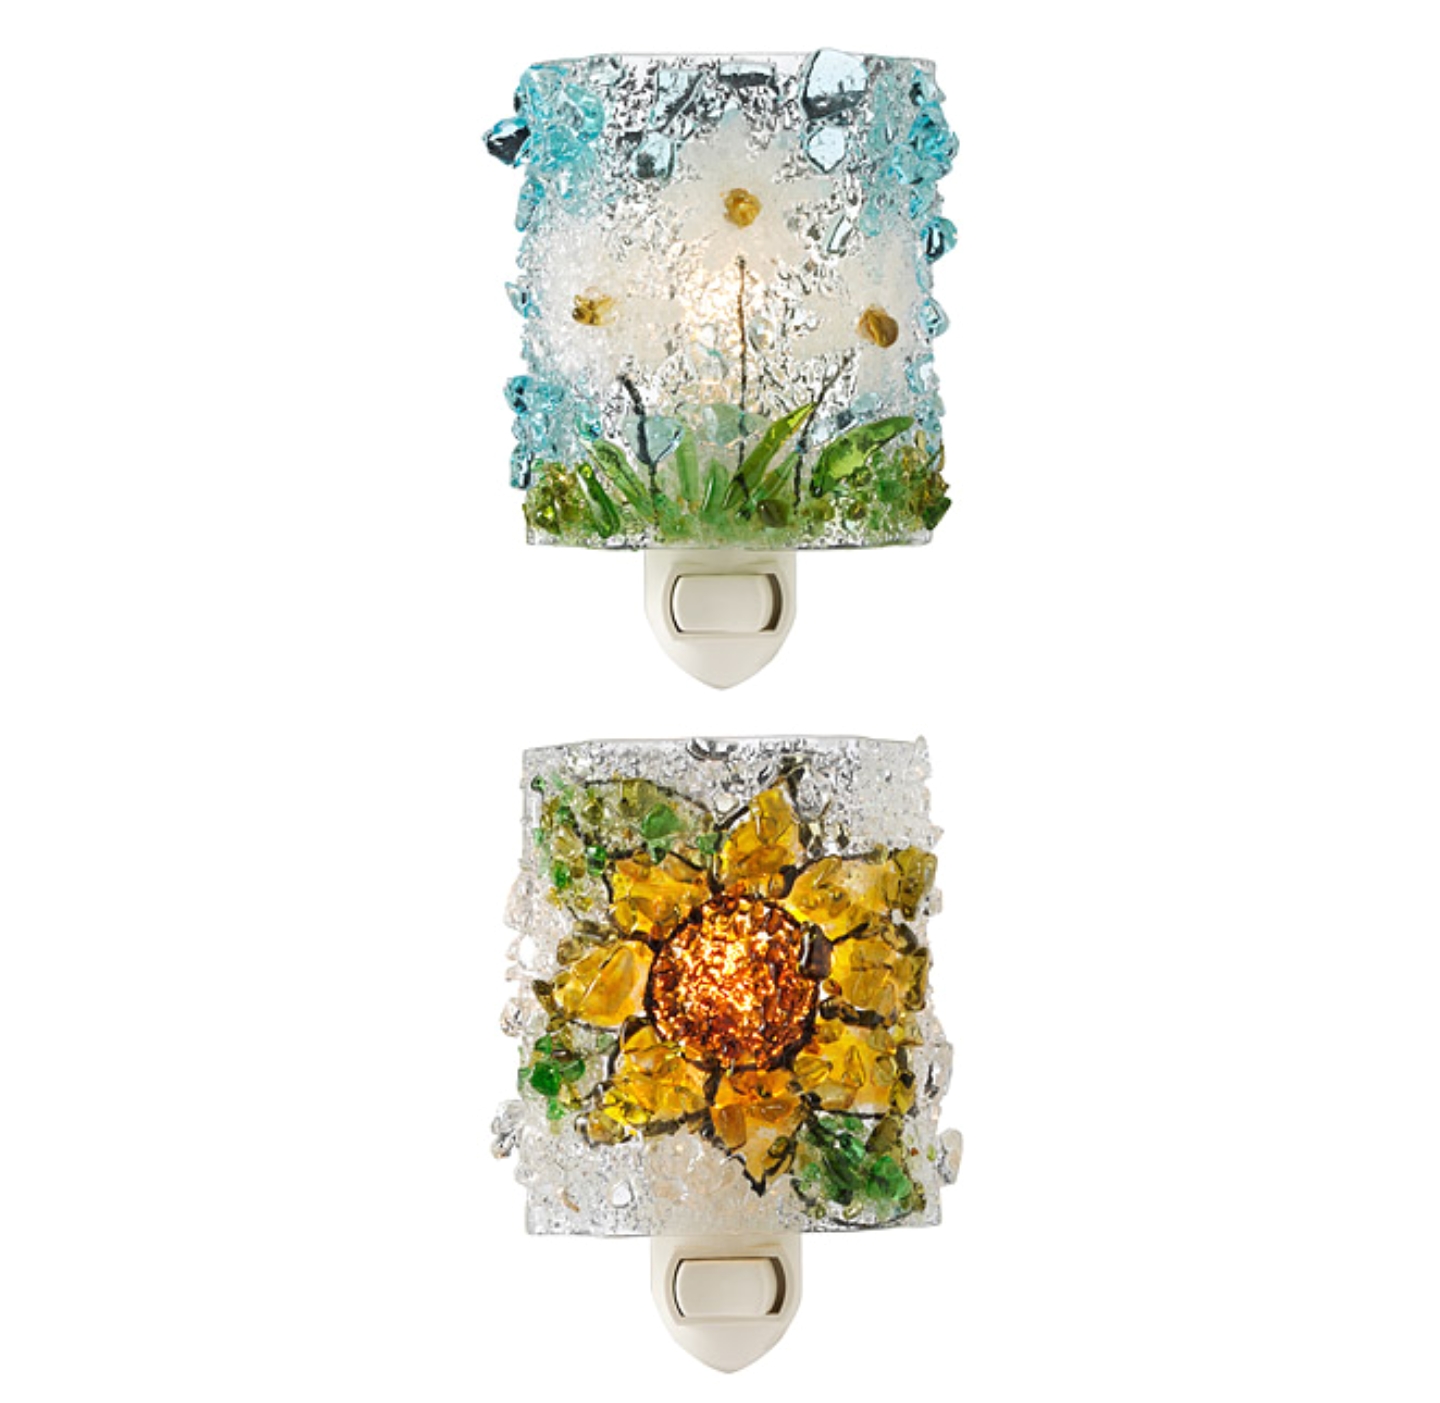 recycled glass flower nightlights stained glass night lights glass lights garden night lighting